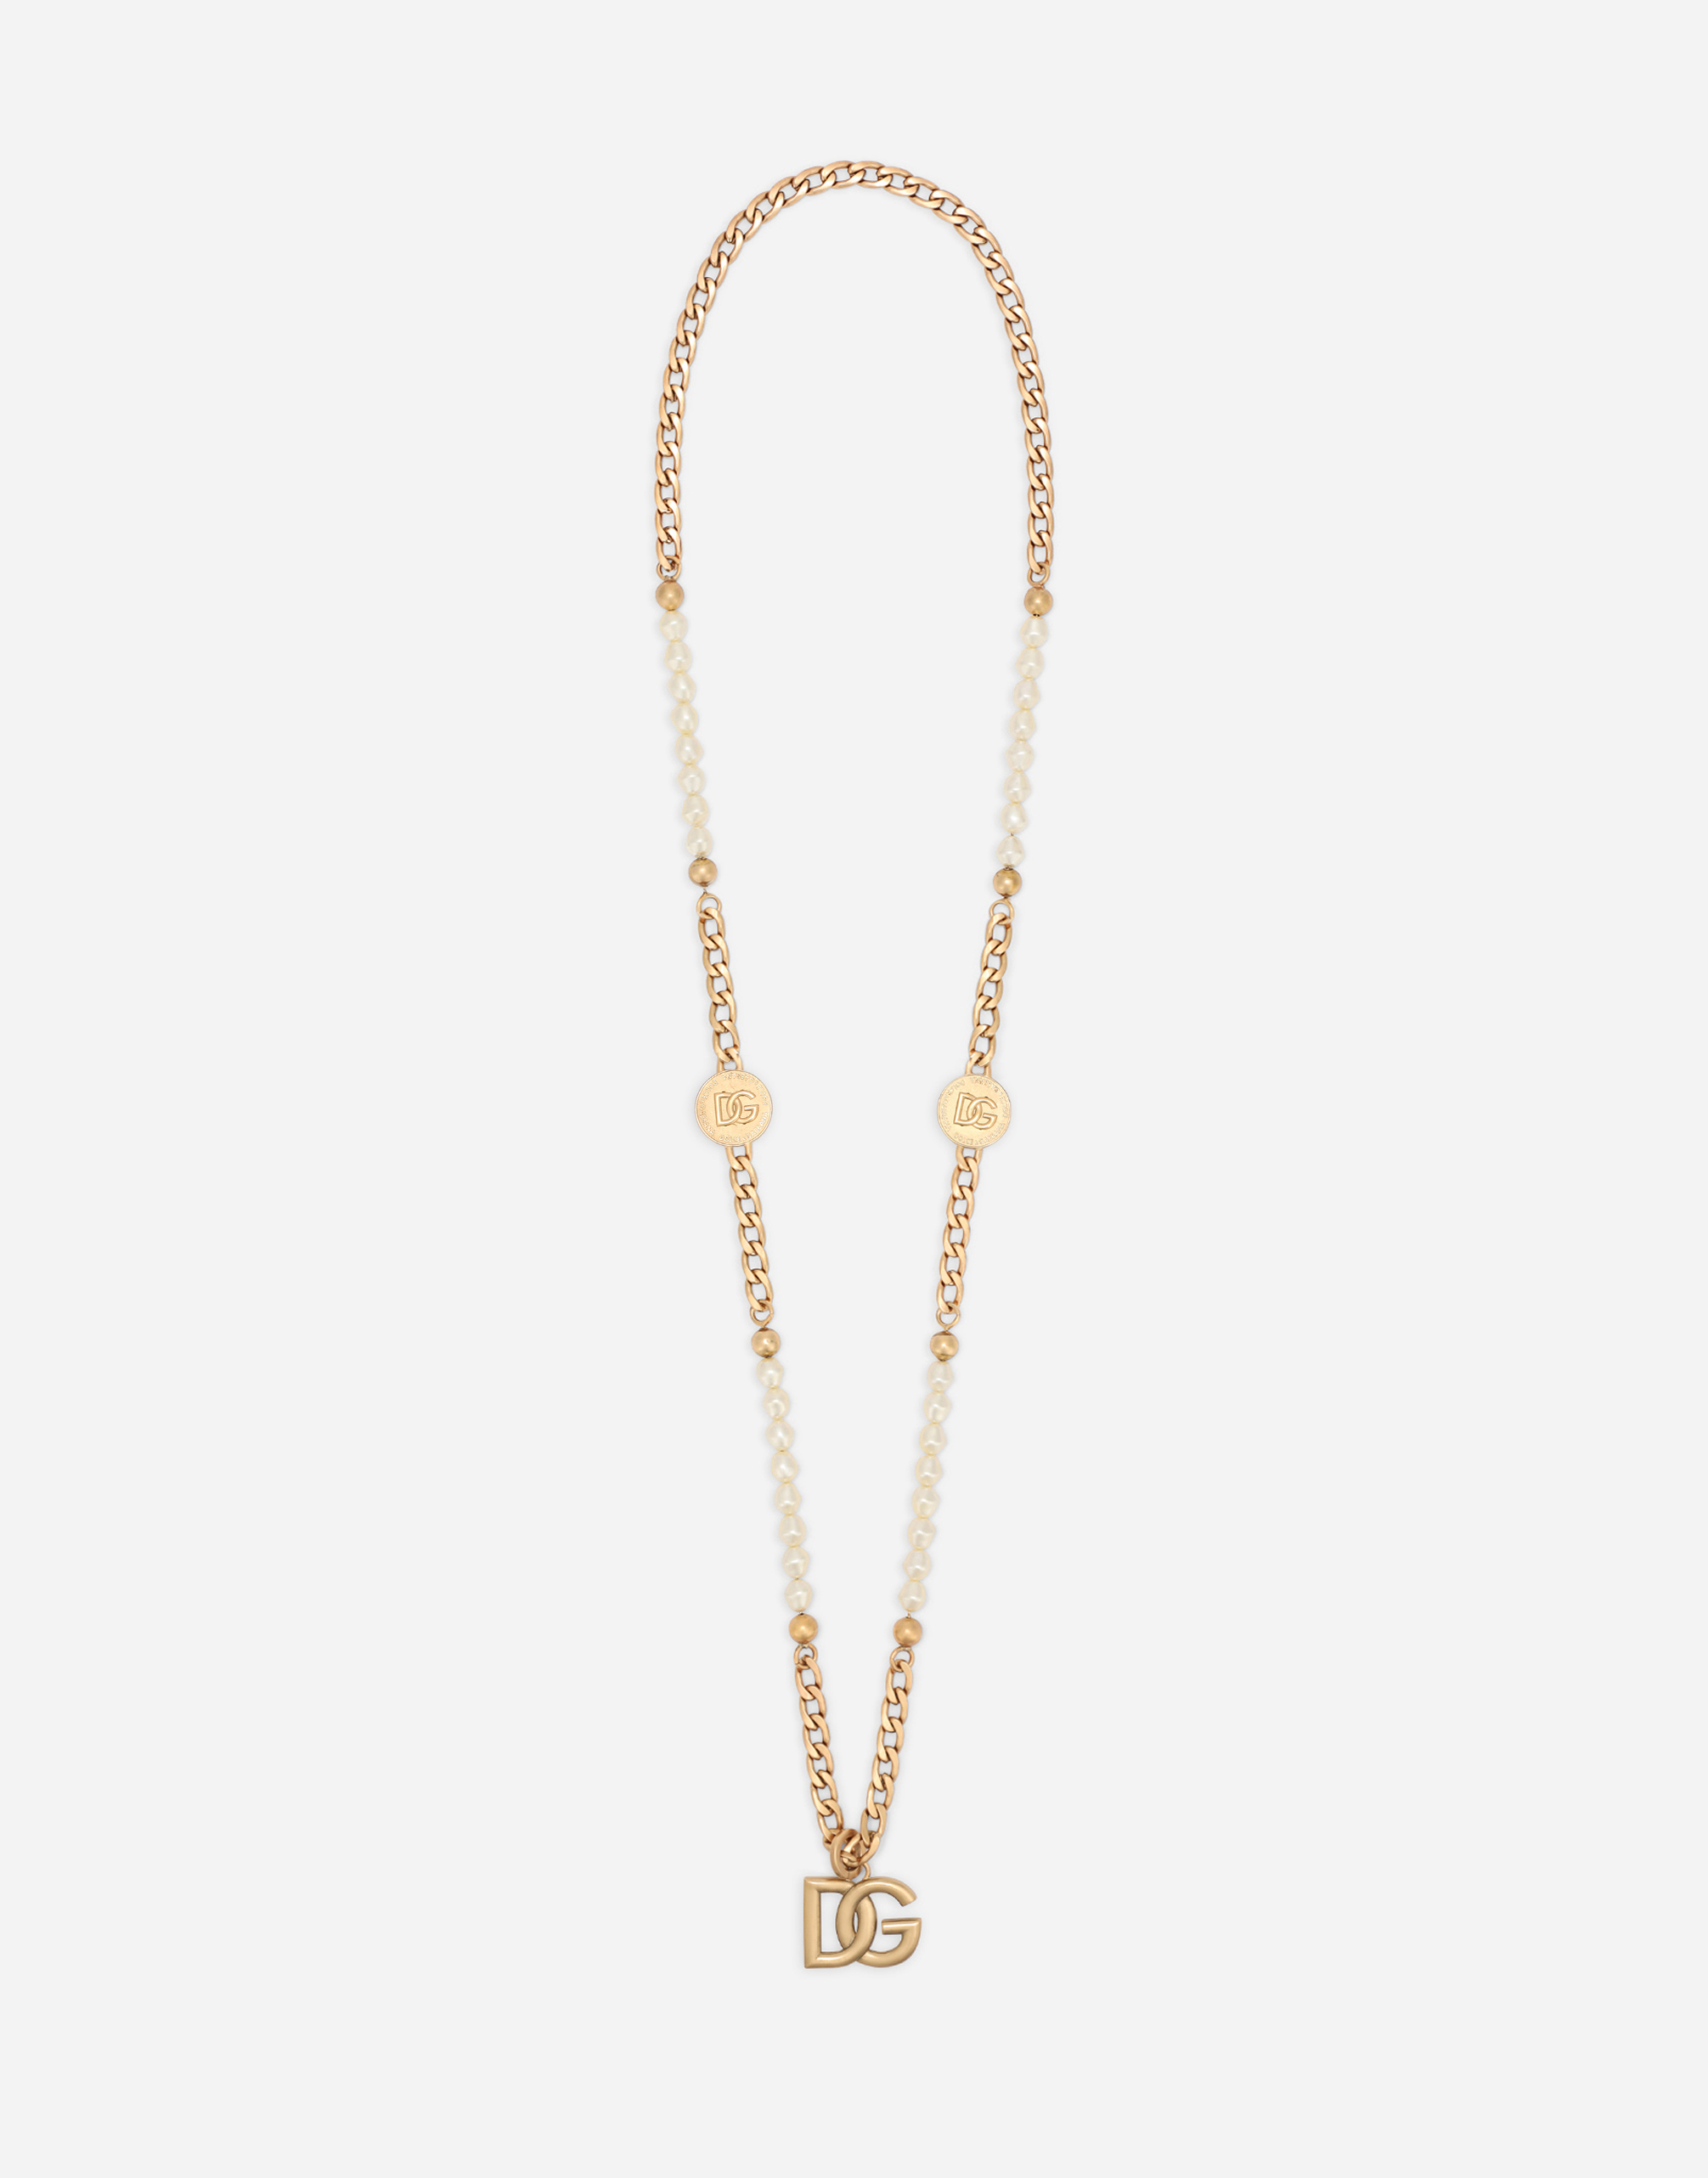 Necklace with coins, pearls and DG logo in Gold